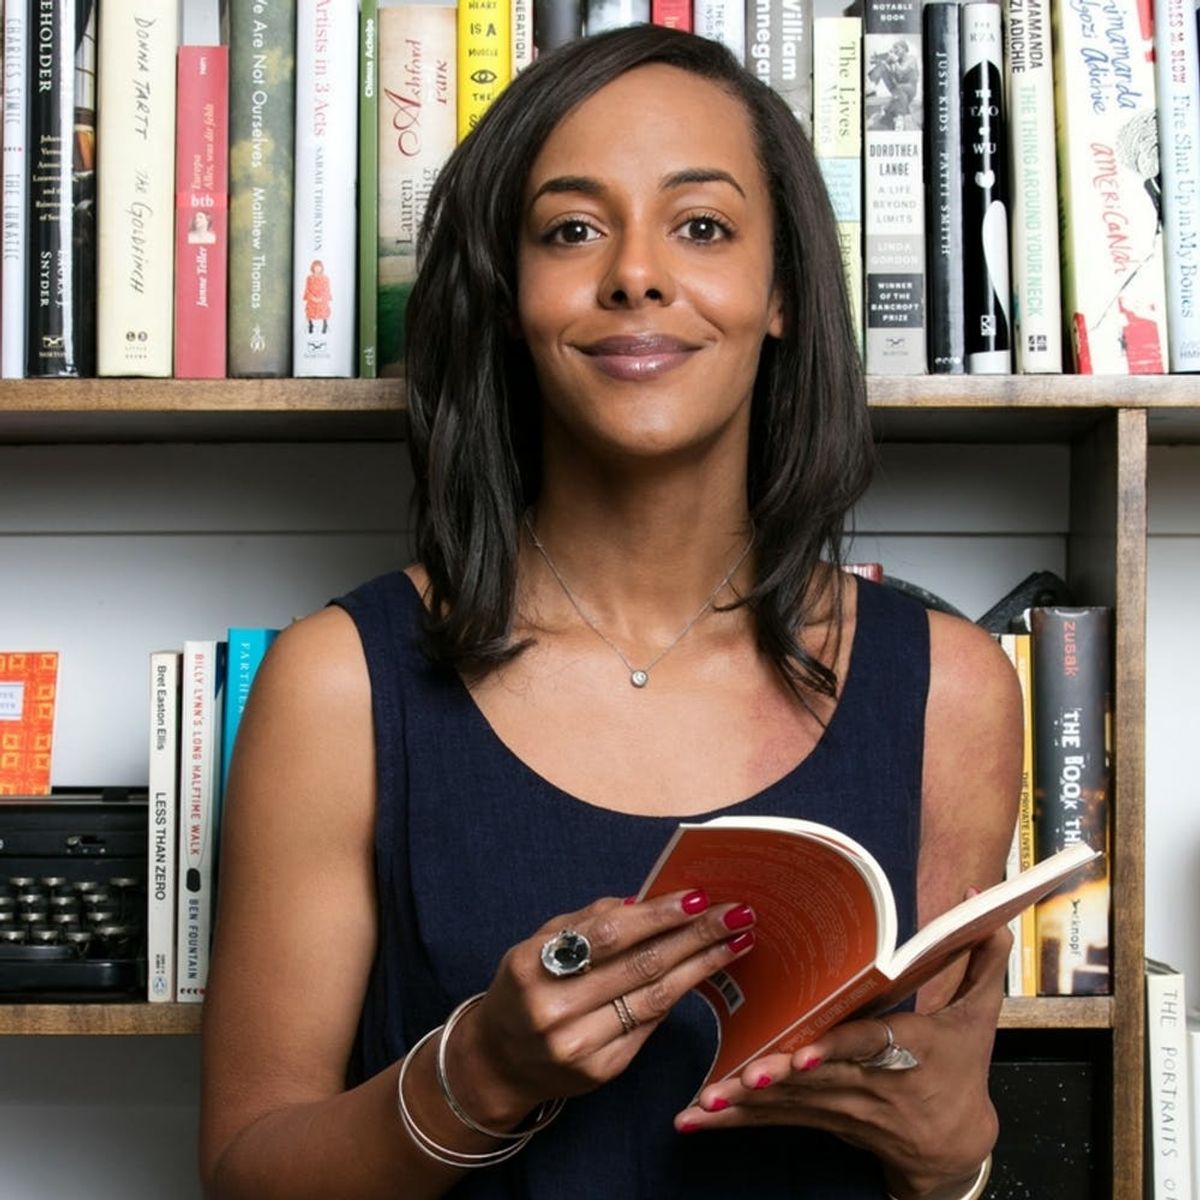 National Book Foundation Boss Lisa Lucas Is Building a Better Future by Getting Kids to Read